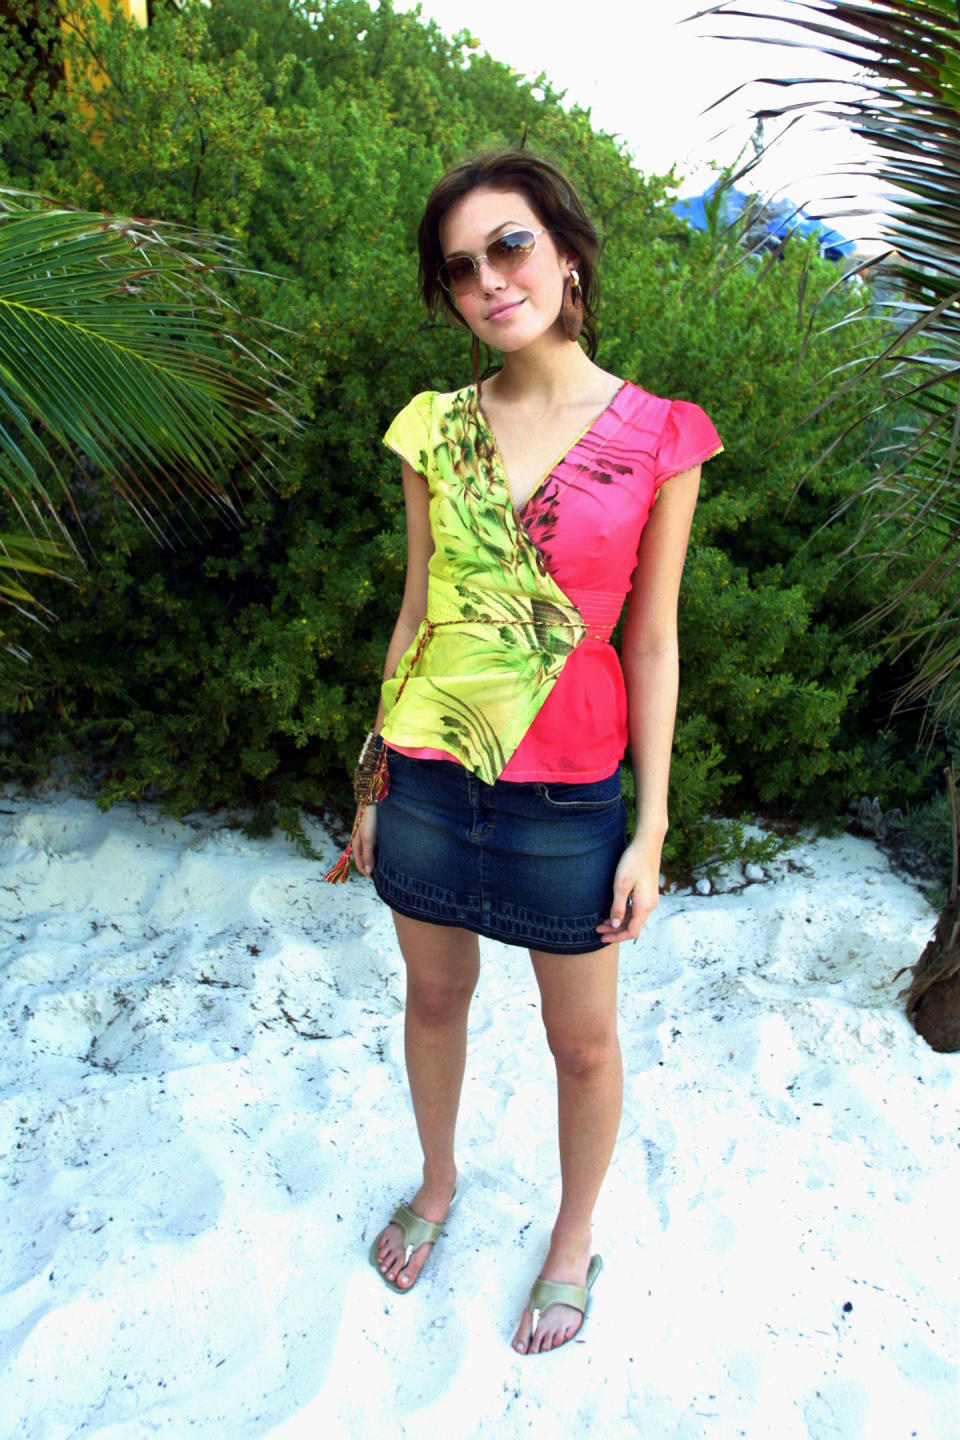 Mandy Moore backstage during MTV Spring Break 2002 at the Grand Oasis Hotel in Cancun, Mexico.&nbsp;